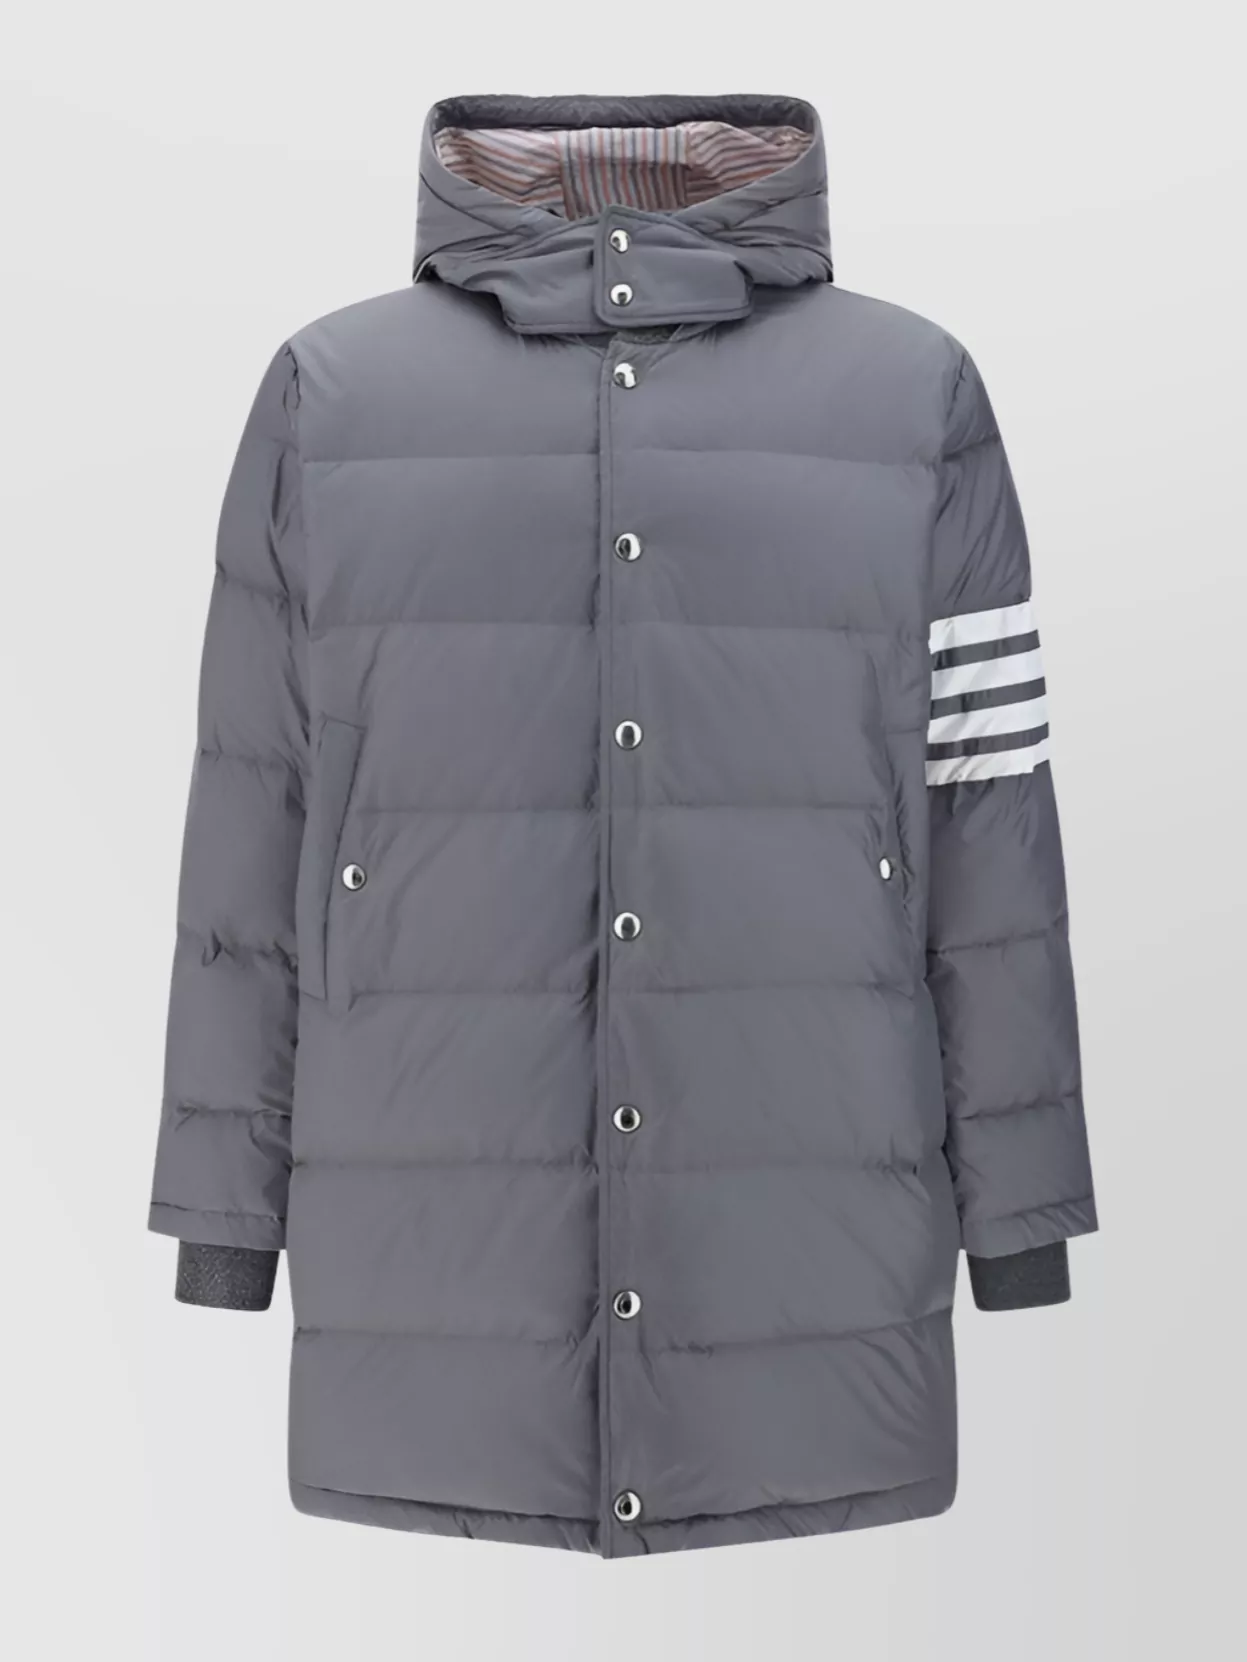 Thom Browne Quilted Padded Jacket Iconic Stripes